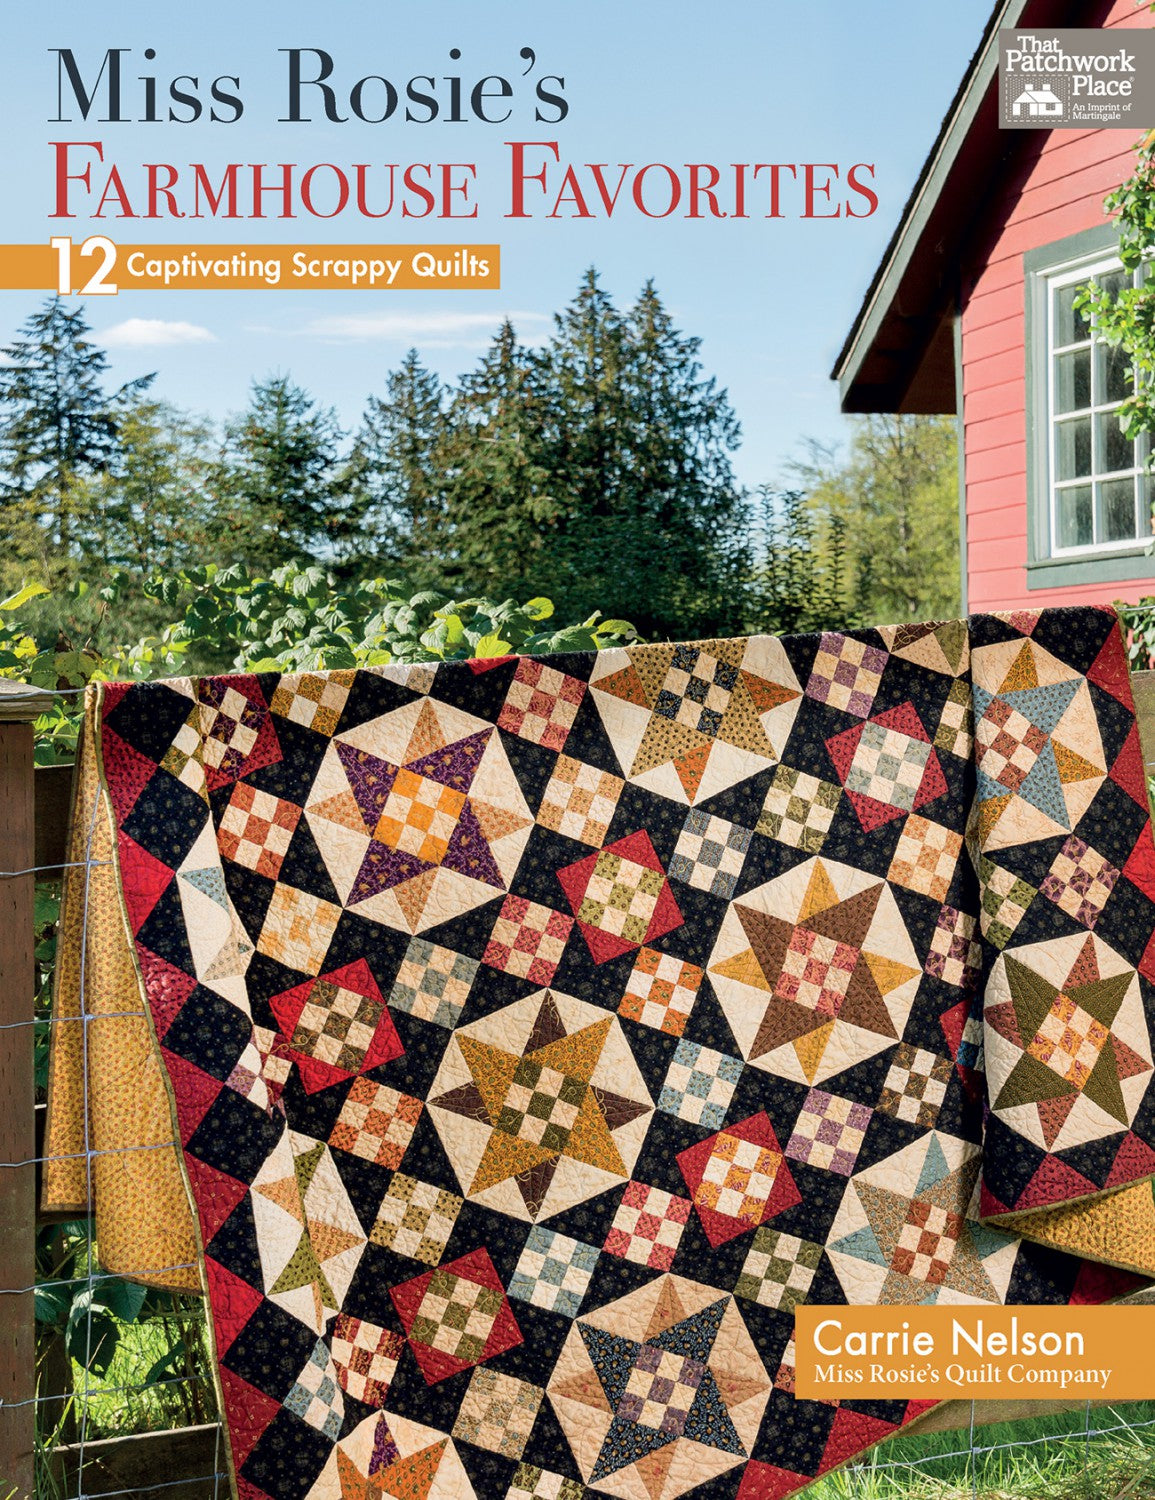 Miss Rosie's Farmhouse Favorites by Carrie Nelson